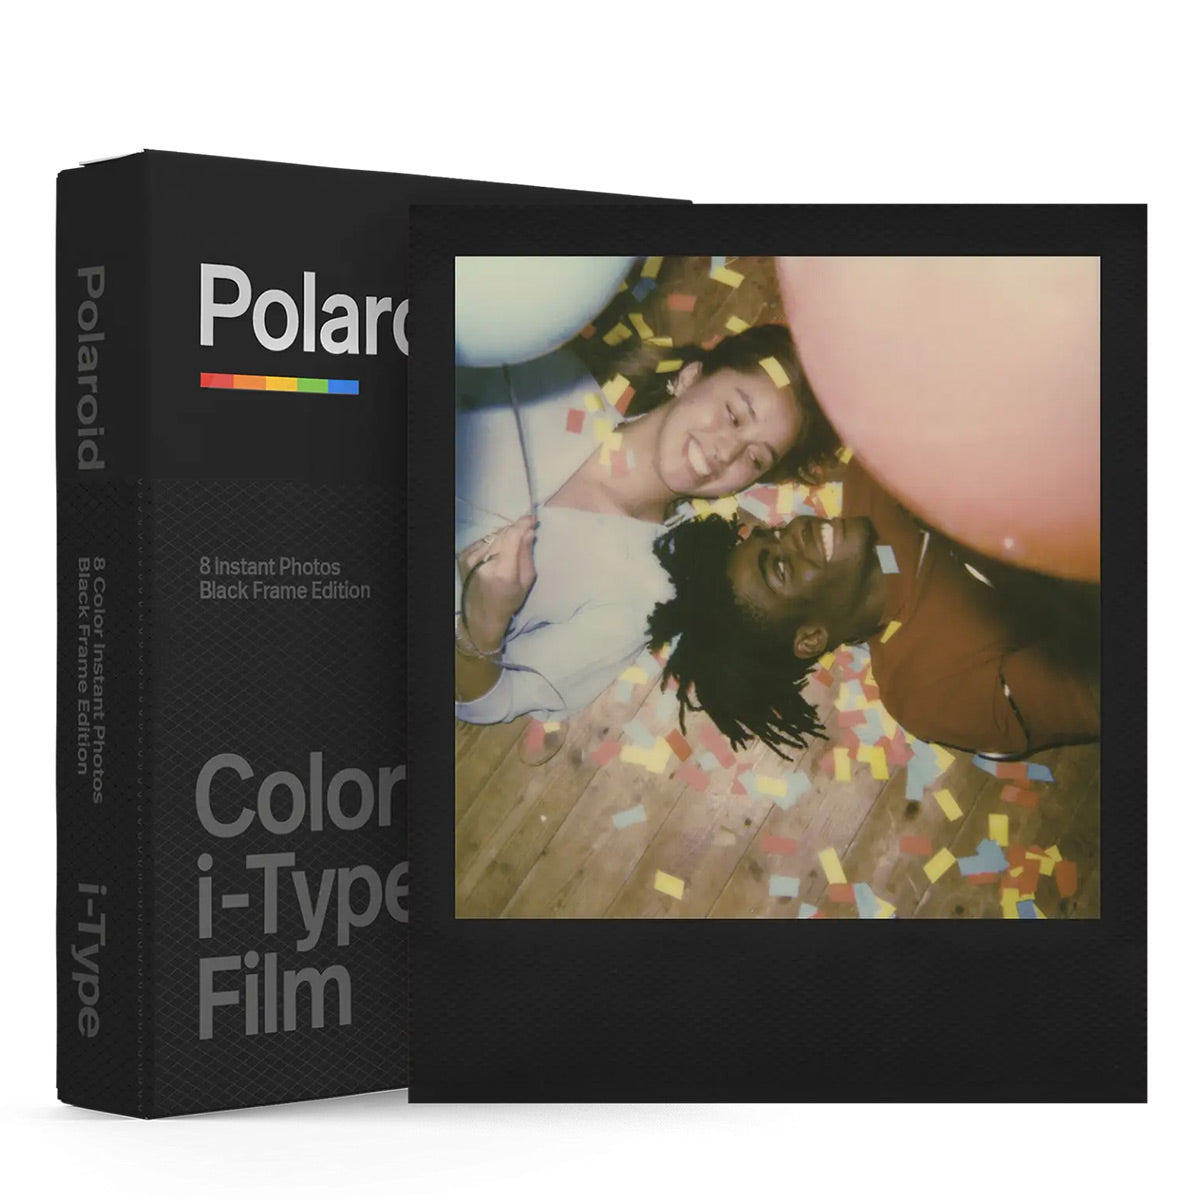 Polaroid Color i-Type Film 8 Instant 3 x 3 Photographs with Black Frame for Now, Now+, Lab, OneStep 2, and OneStep+ Cameras